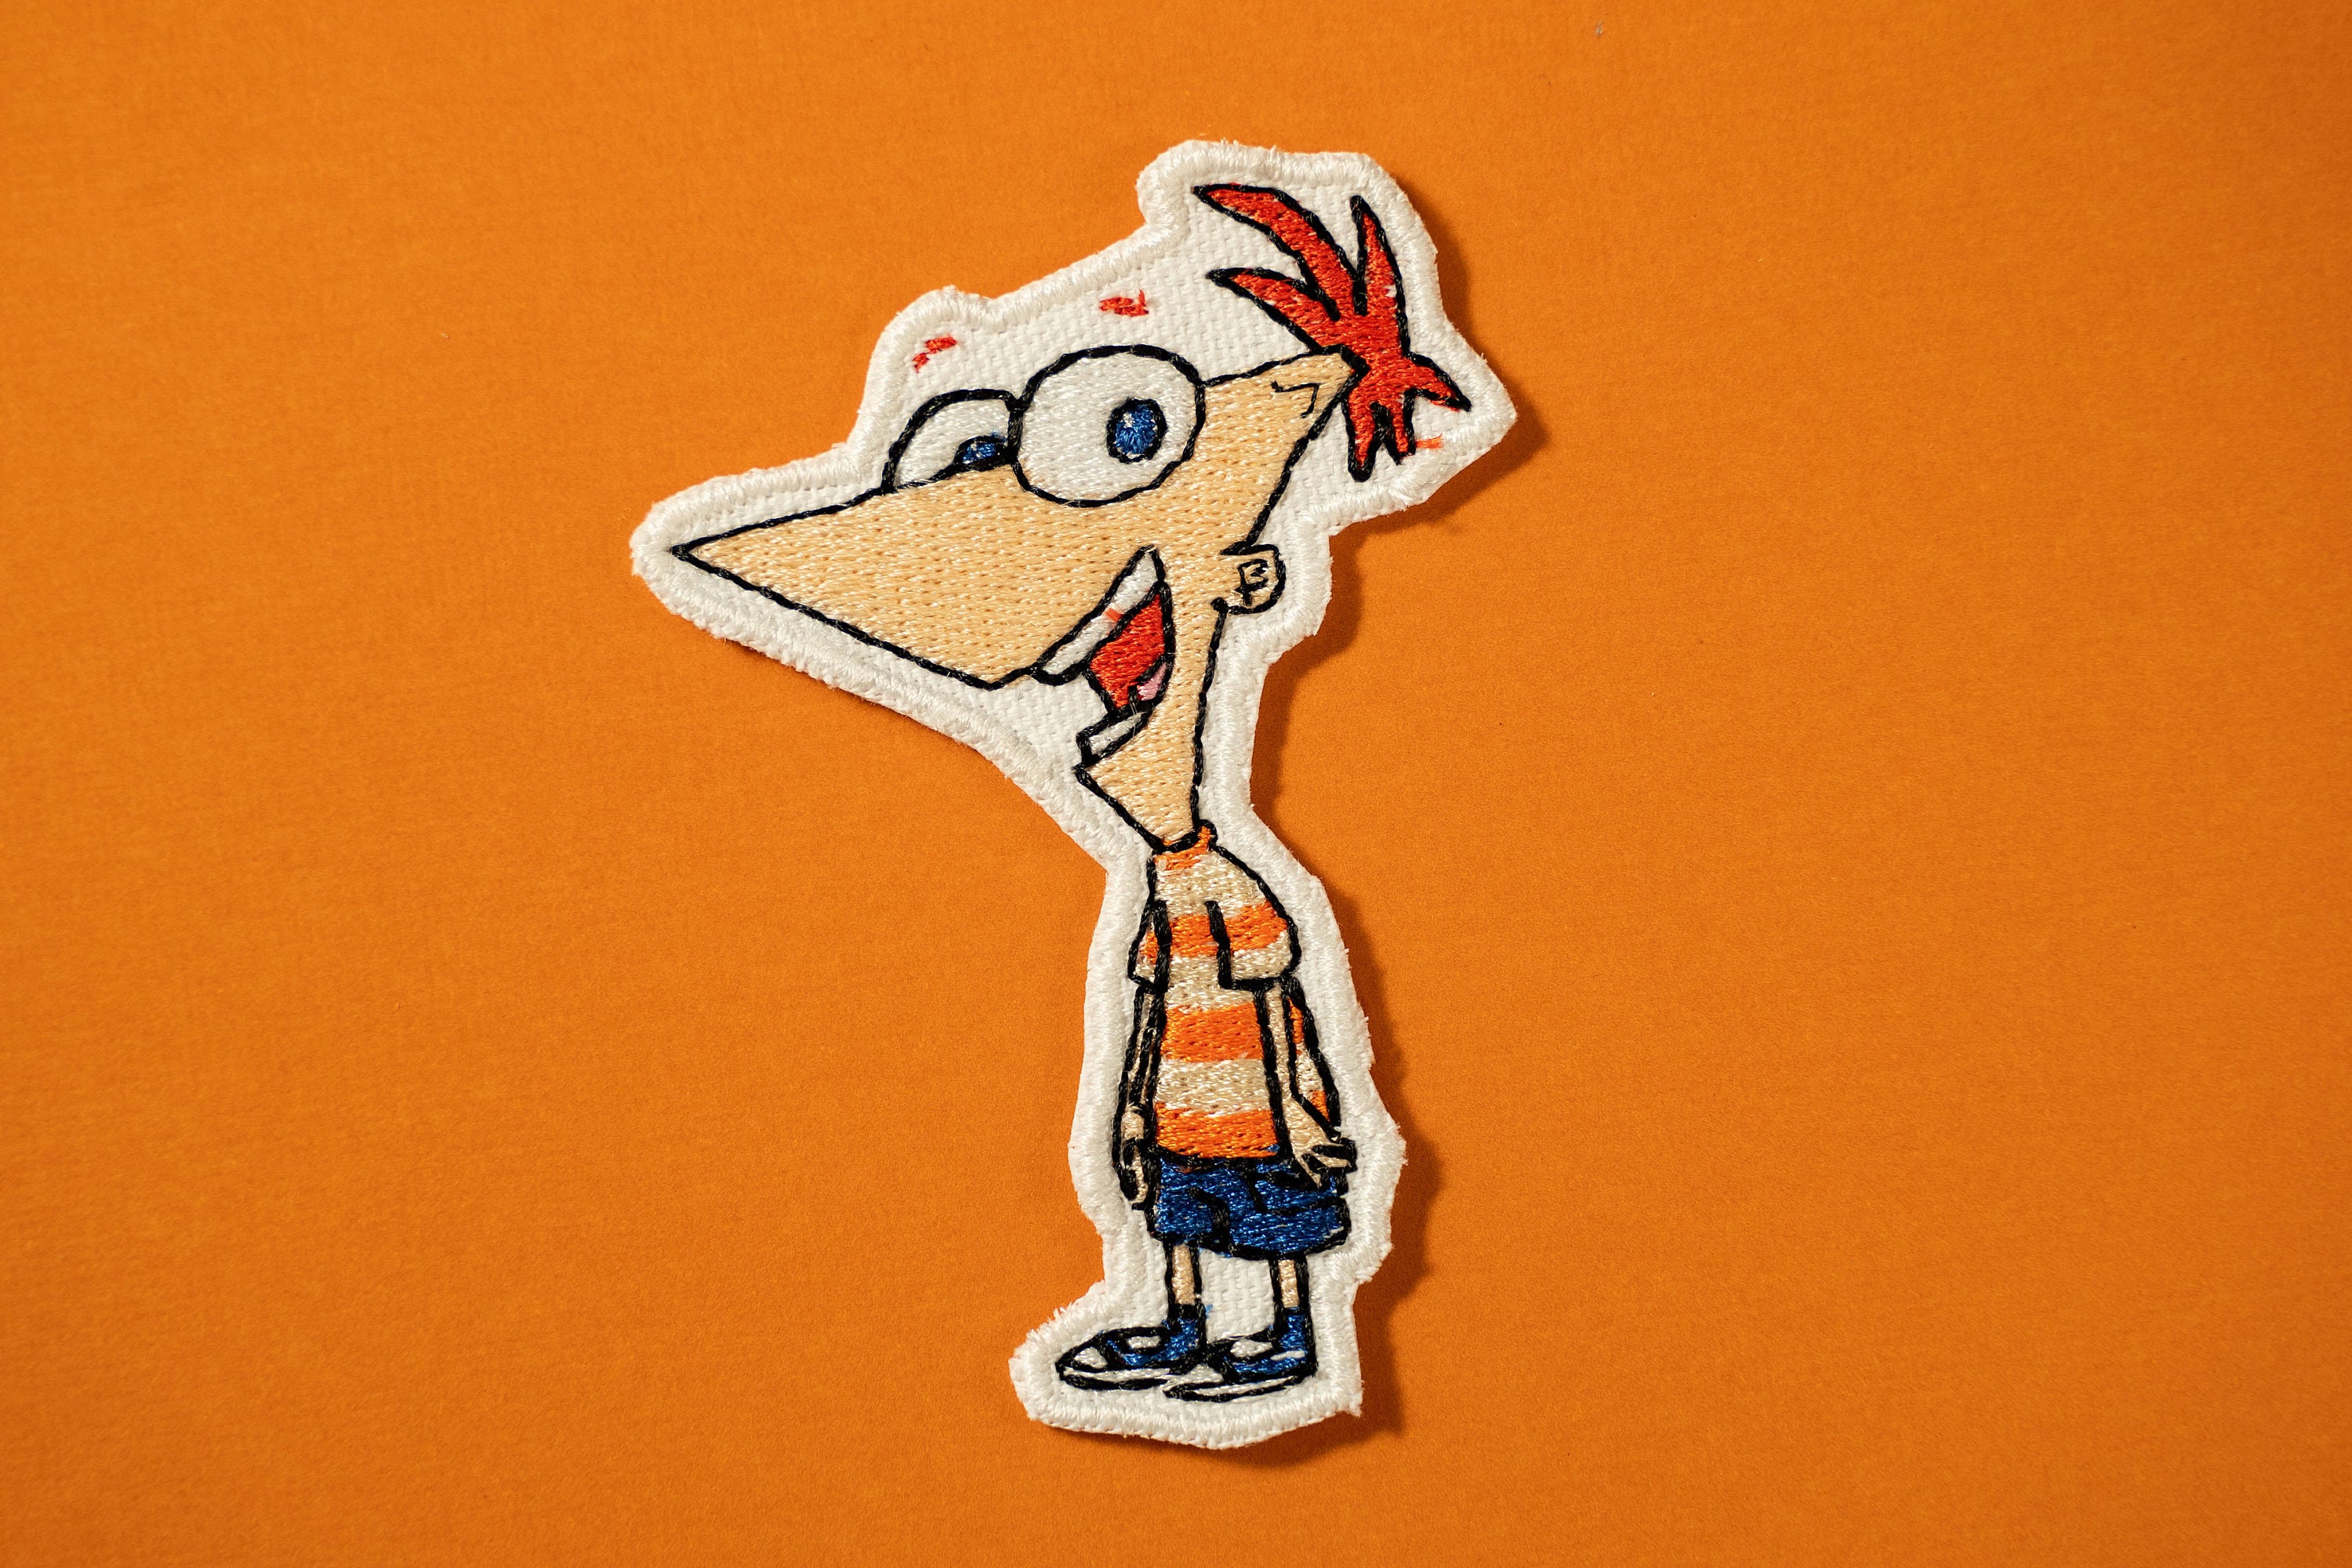 Meep Disney Phineas and Ferb Iron on or Sew on Patch